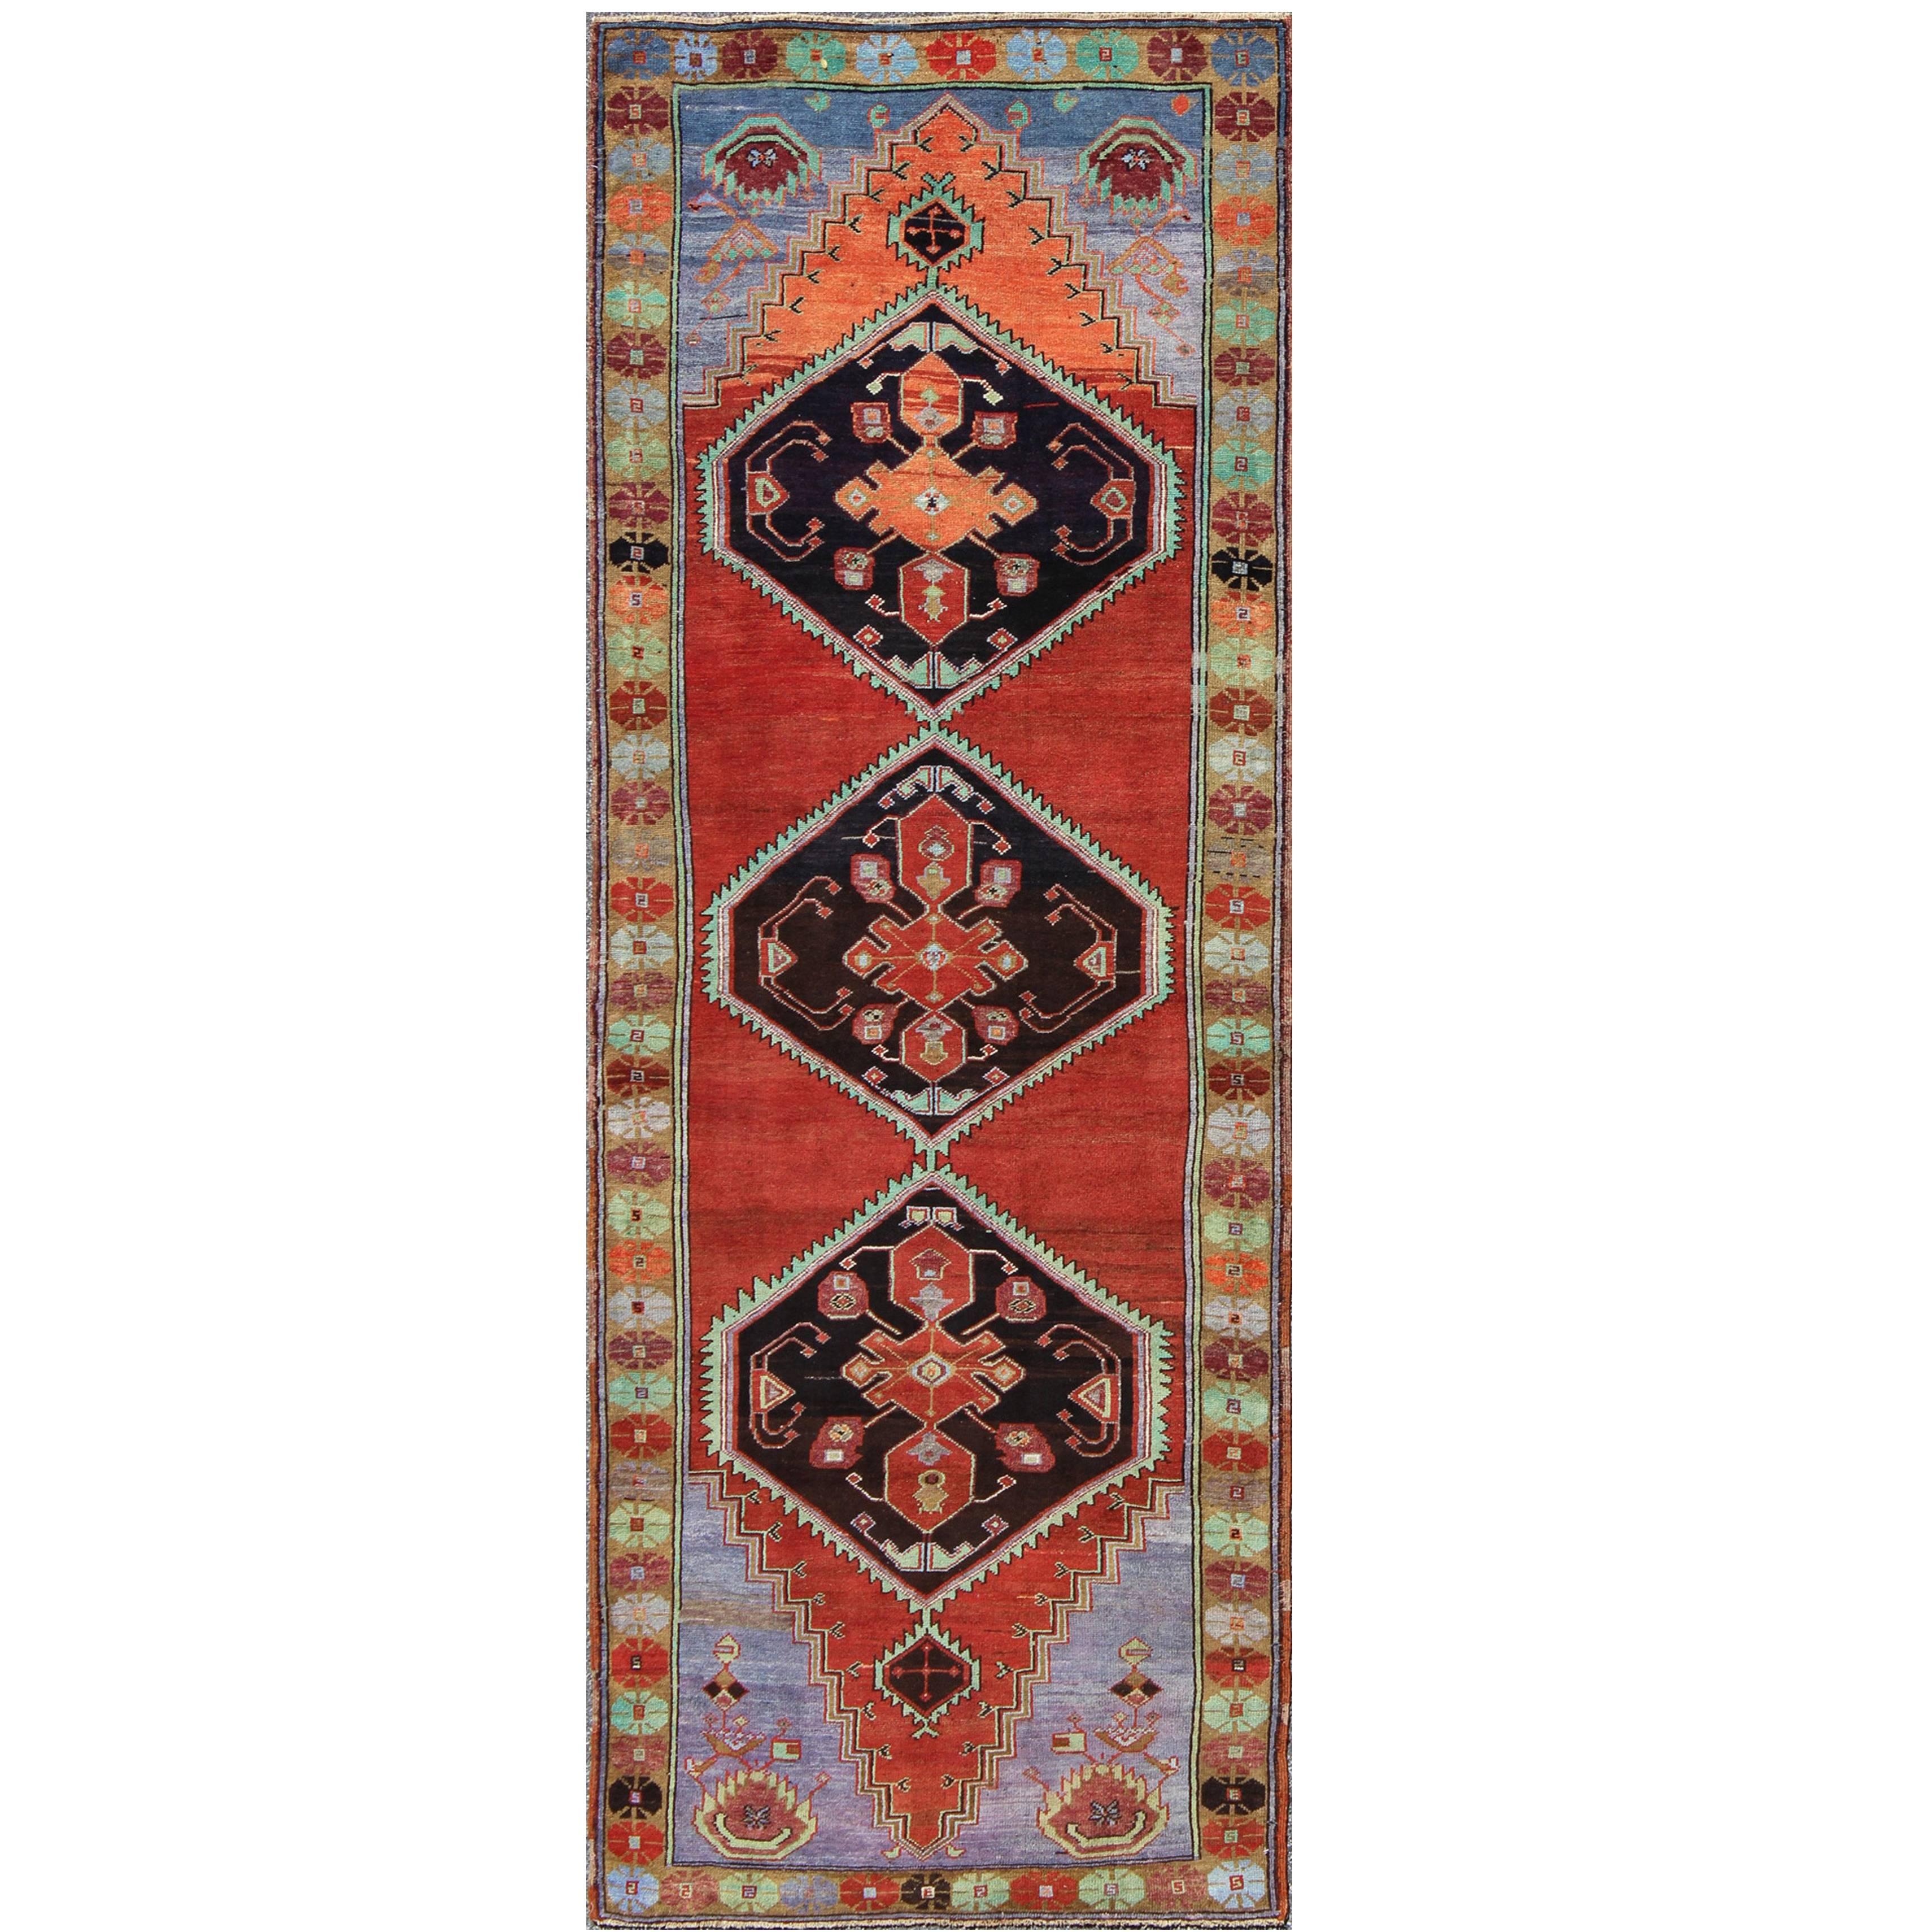 Unique and Colorful Turkish Oushak Rug with Multi-Layered Medallions & Cornices